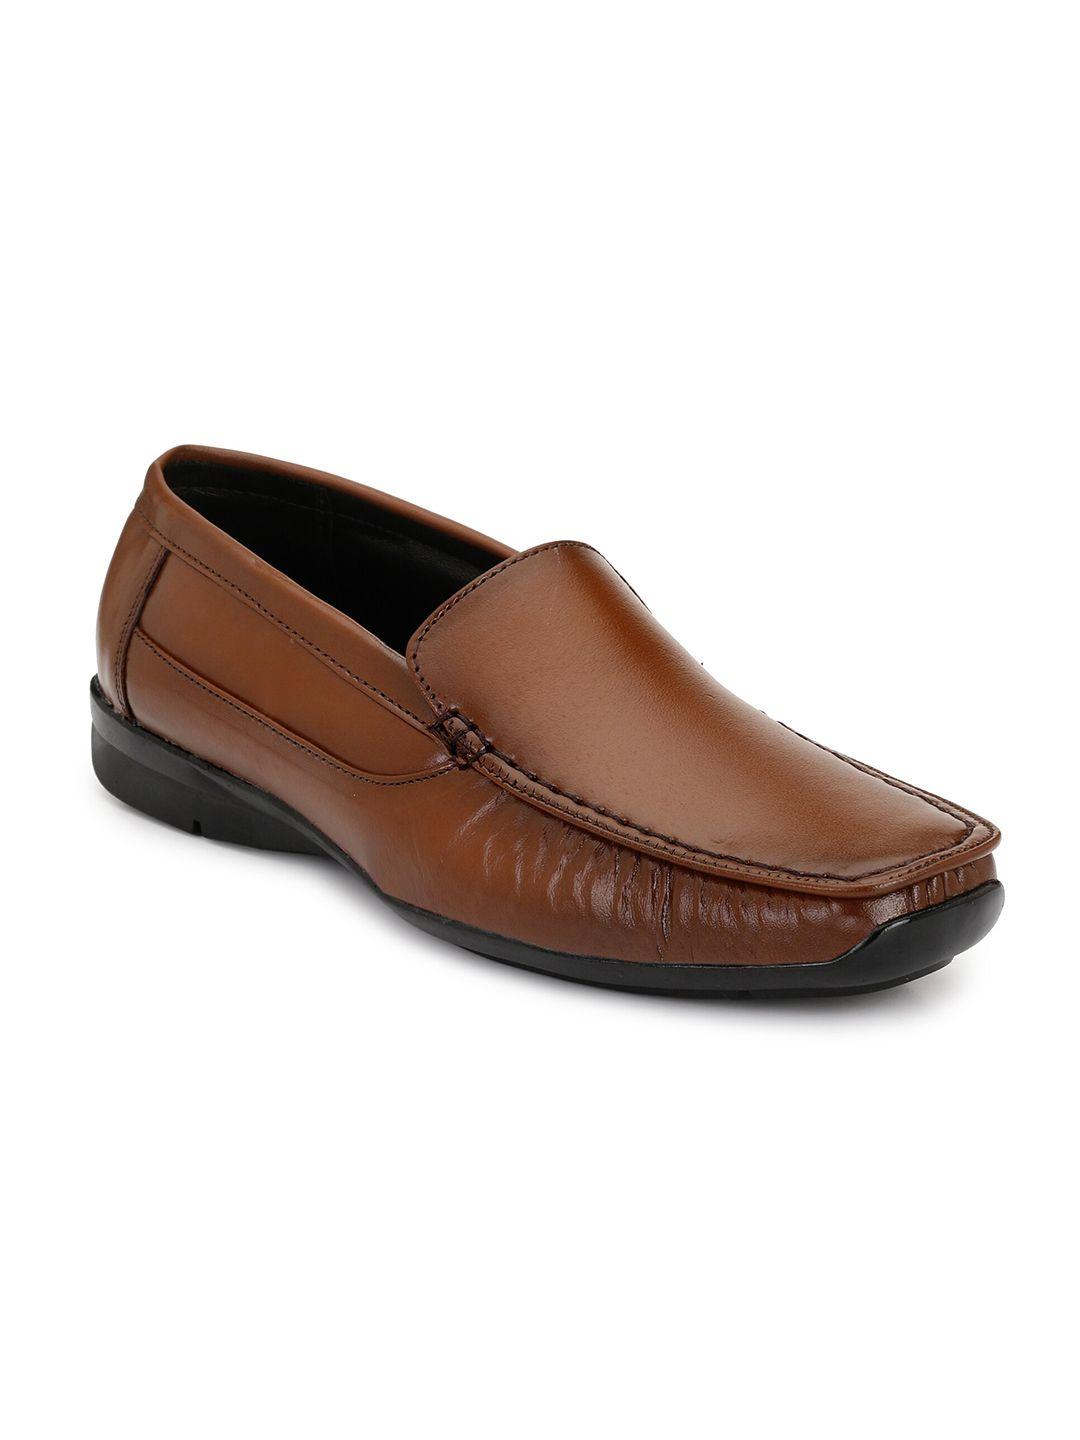 eego italy men leather formal loafers